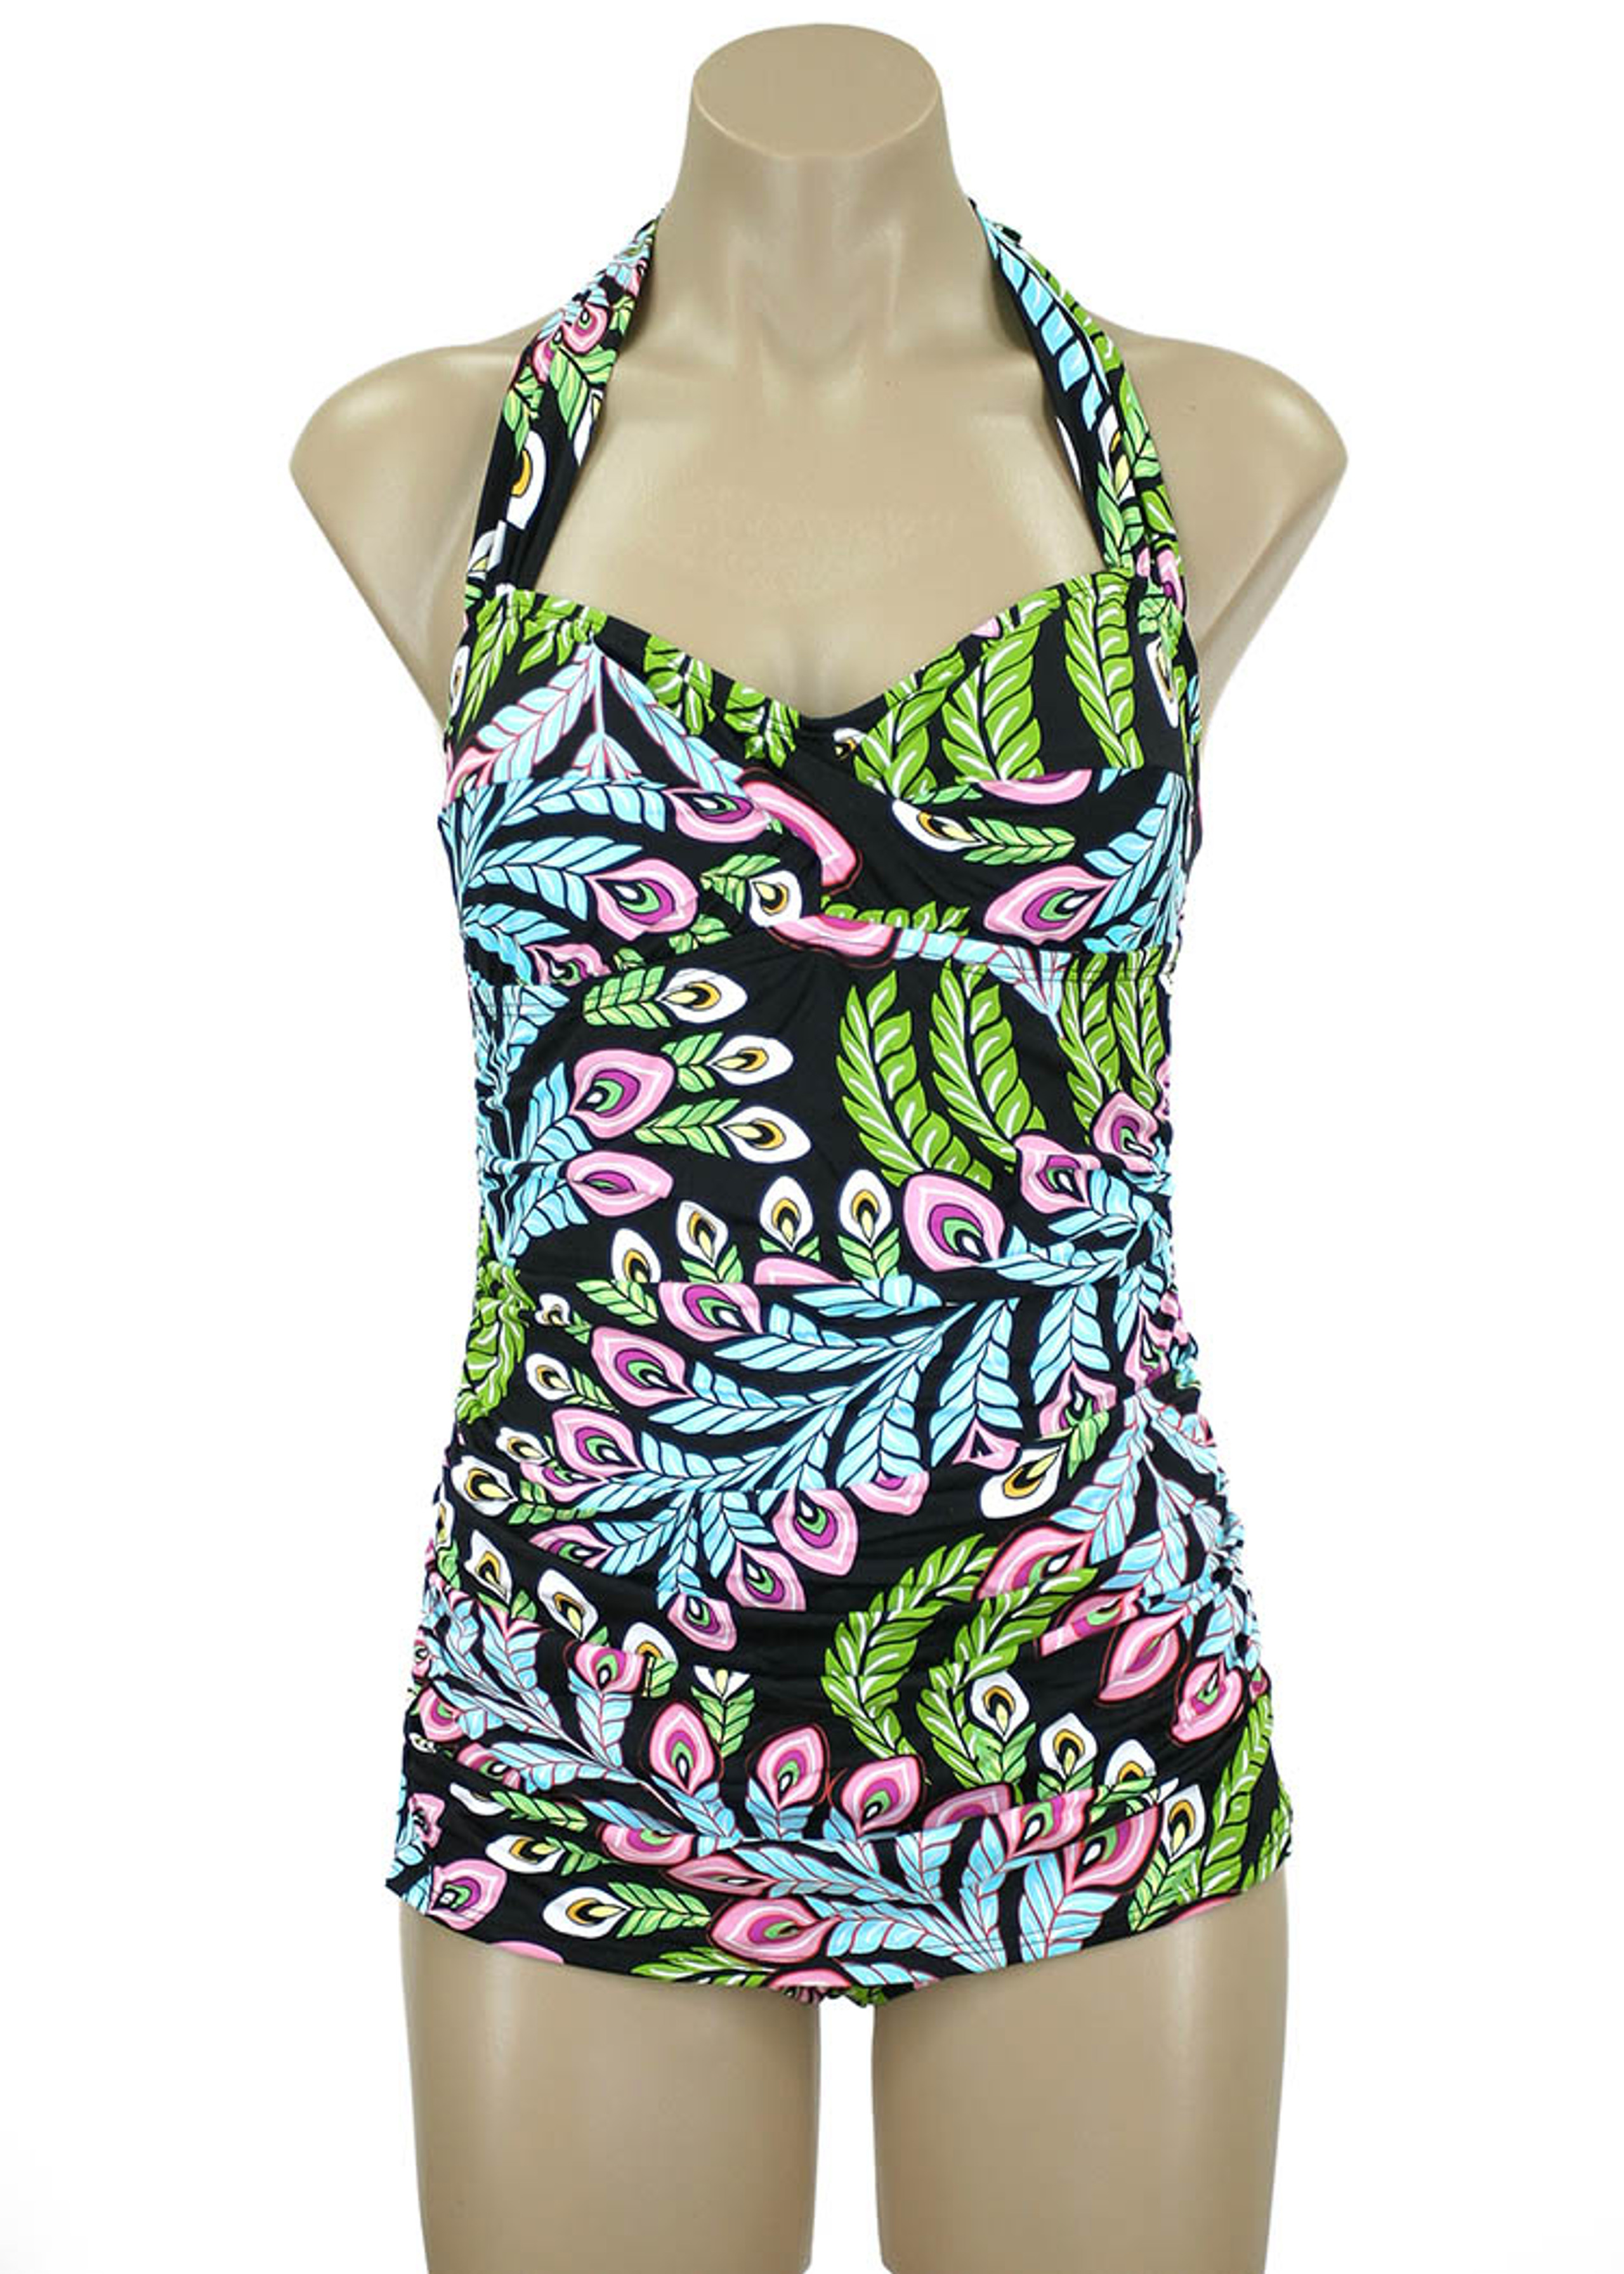 Swimwear - Kechika - Shop By Group - FLORAL PRINTS - Peacock Feathers ...